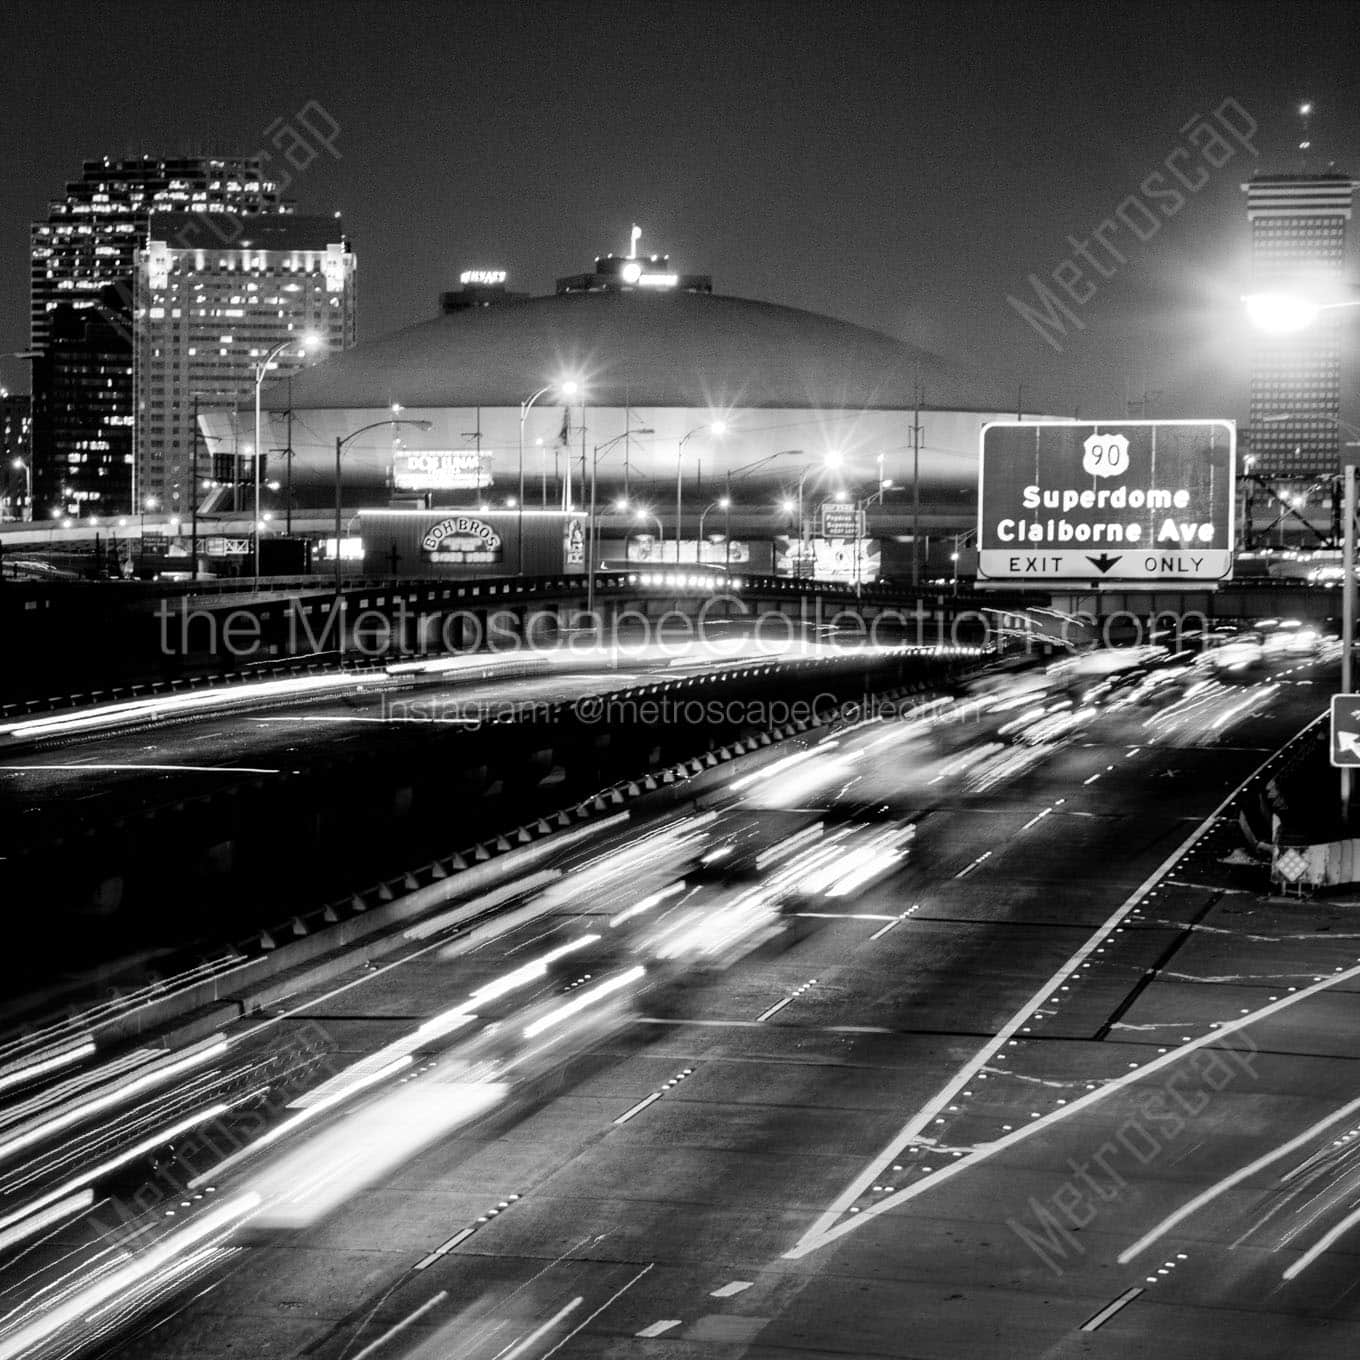 new orleans skyline and superdome Black & White Office Art